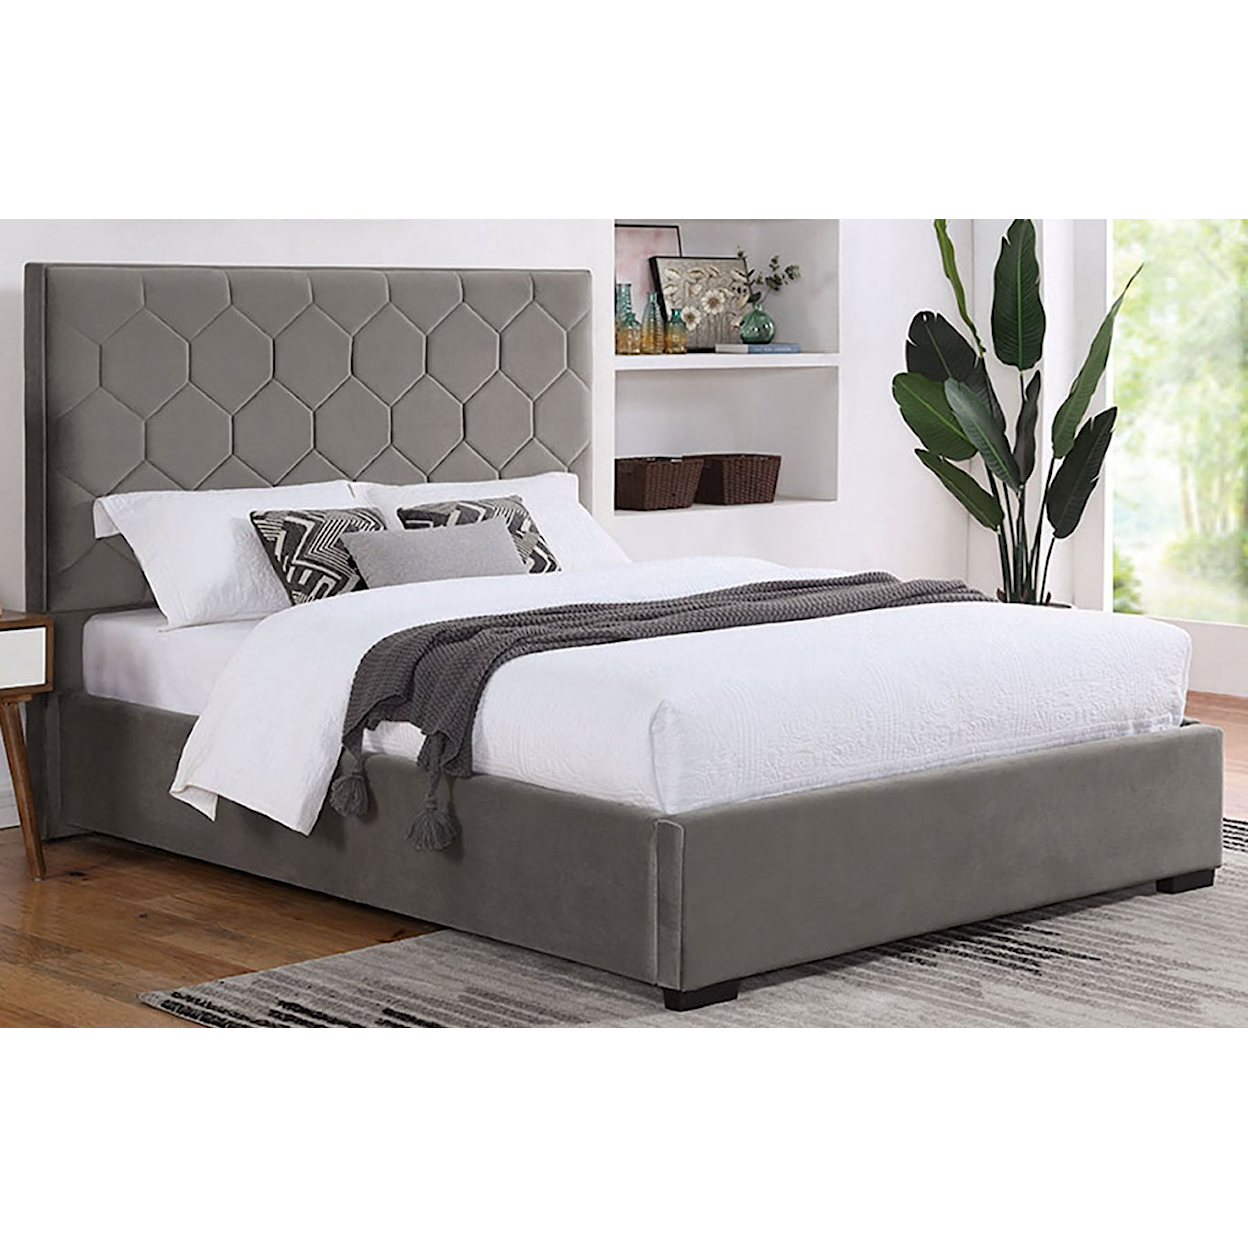 Furniture of America Gatineau Upholstered Cal. King Bed